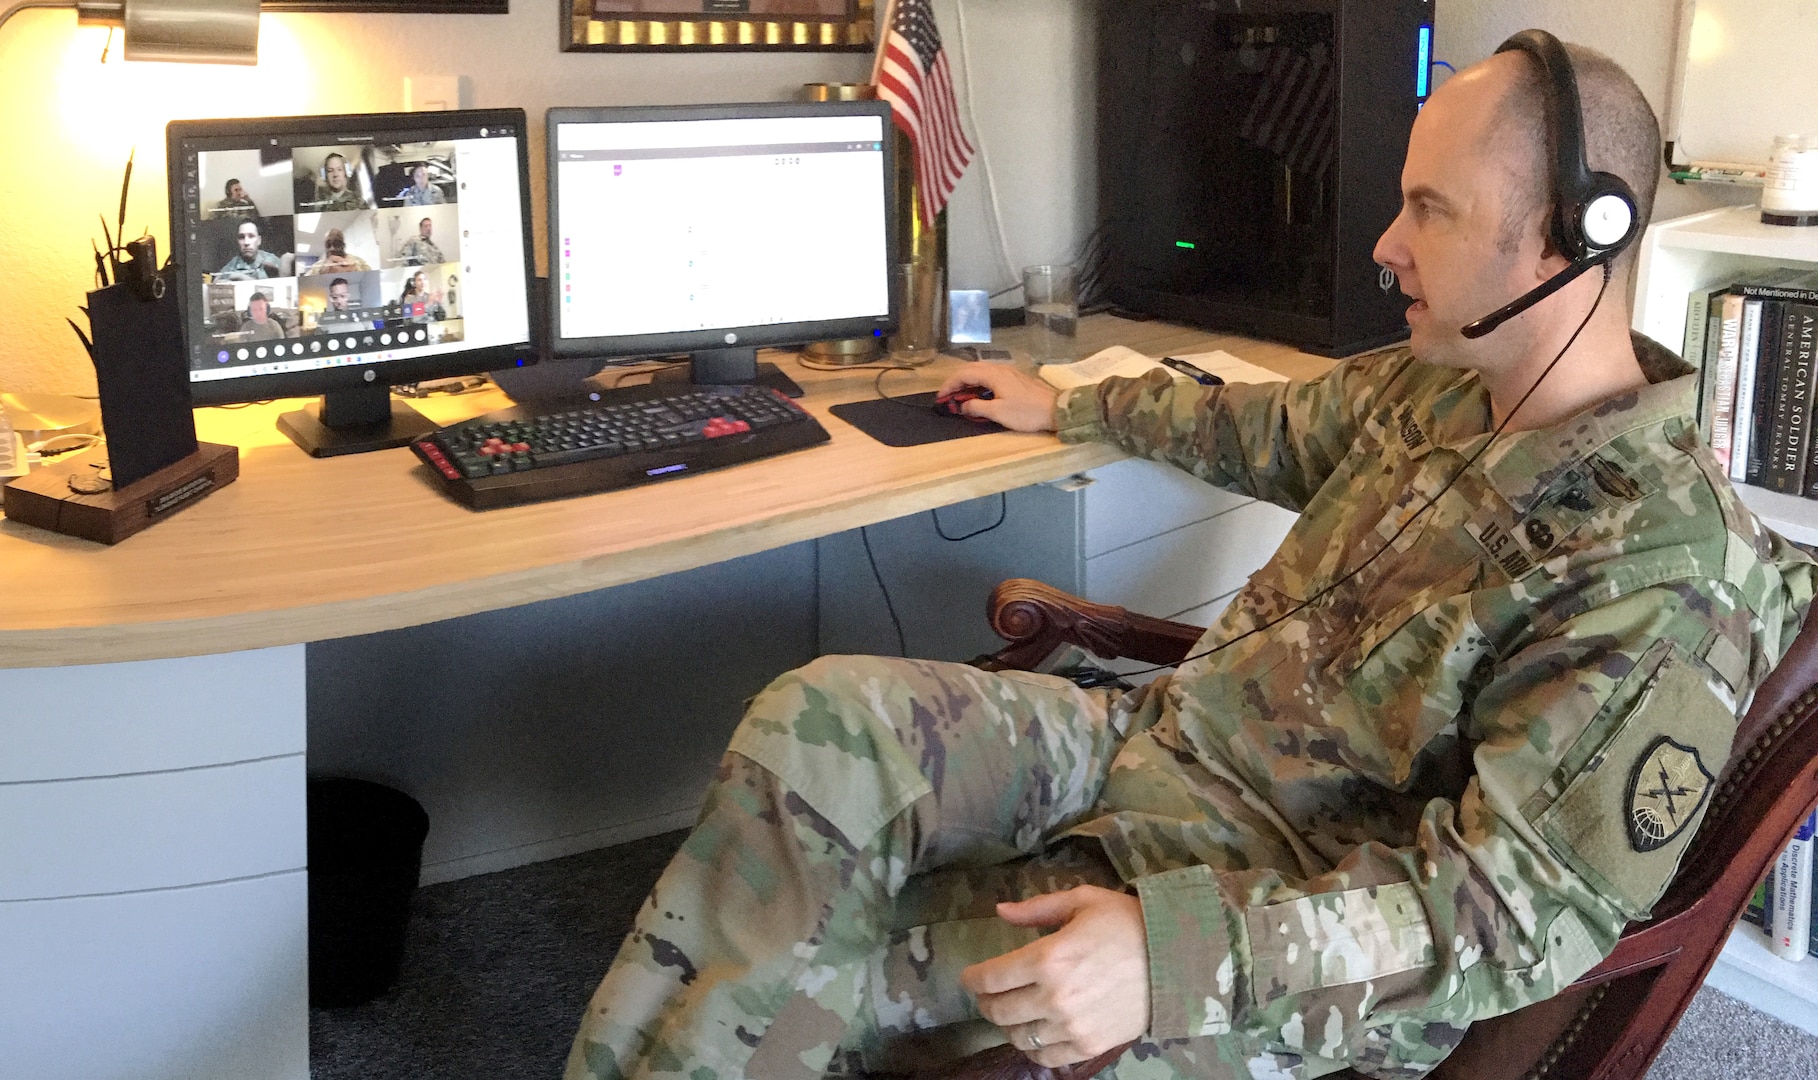 U.S. Army Maj. Mikael Magnuson, commander of Cyber Protection Team 171, discusses drill details with personnel in his unit, June 25, 2020. Due to COVID-19 and social distancing, Magnuson conducted the unit's first virtual inactive duty training from his home in Rocklin, California.